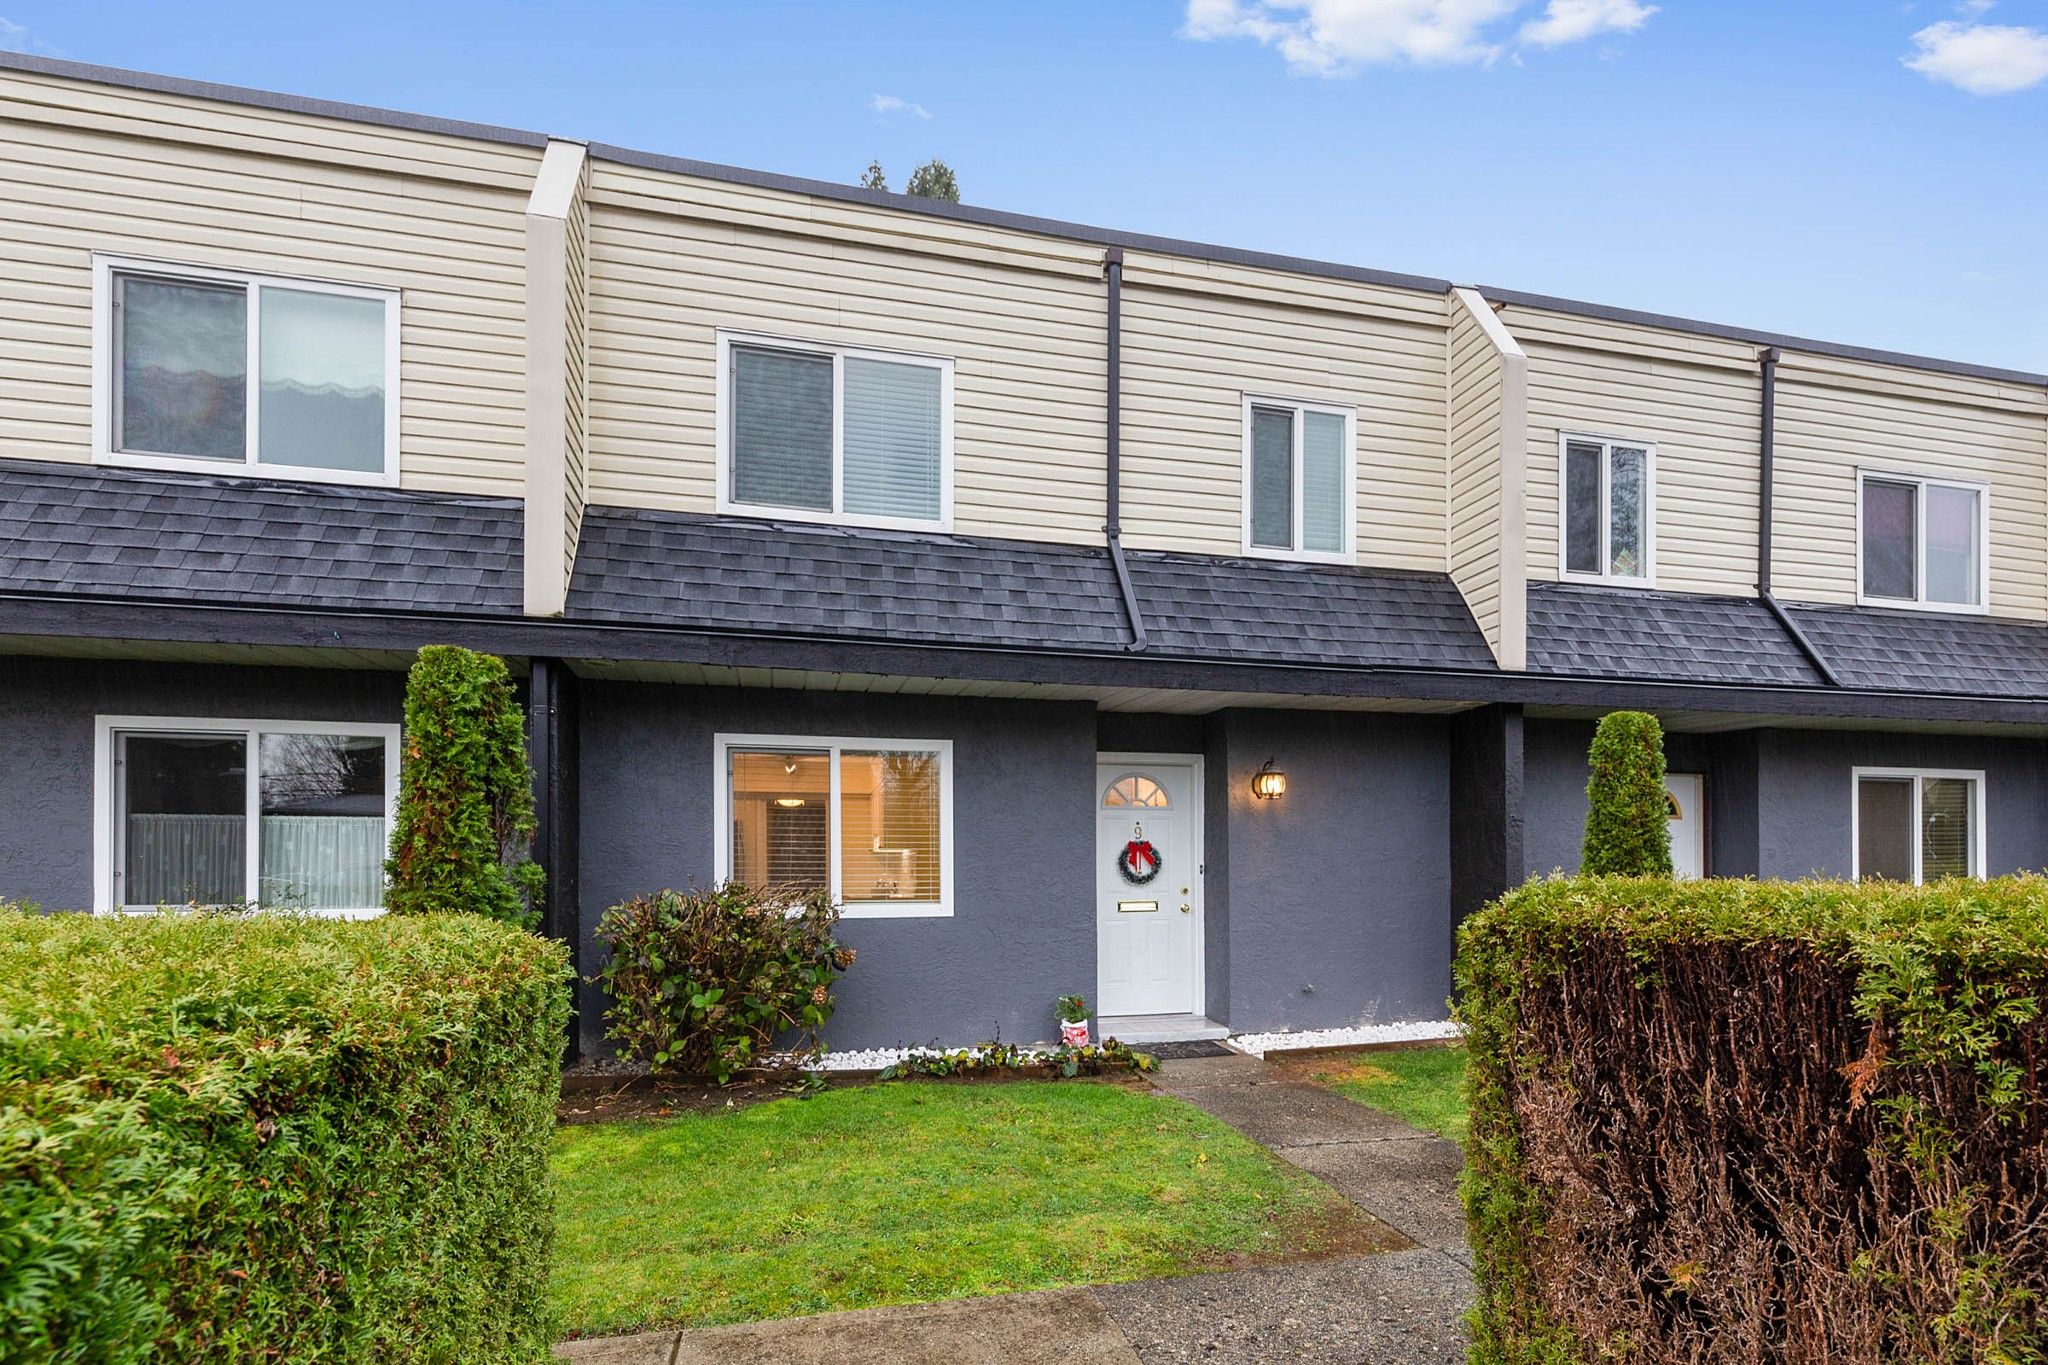 Main Photo: 9 2957 OXFORD Street in Port Coquitlam: Glenwood PQ Townhouse for sale : MLS®# R2519908